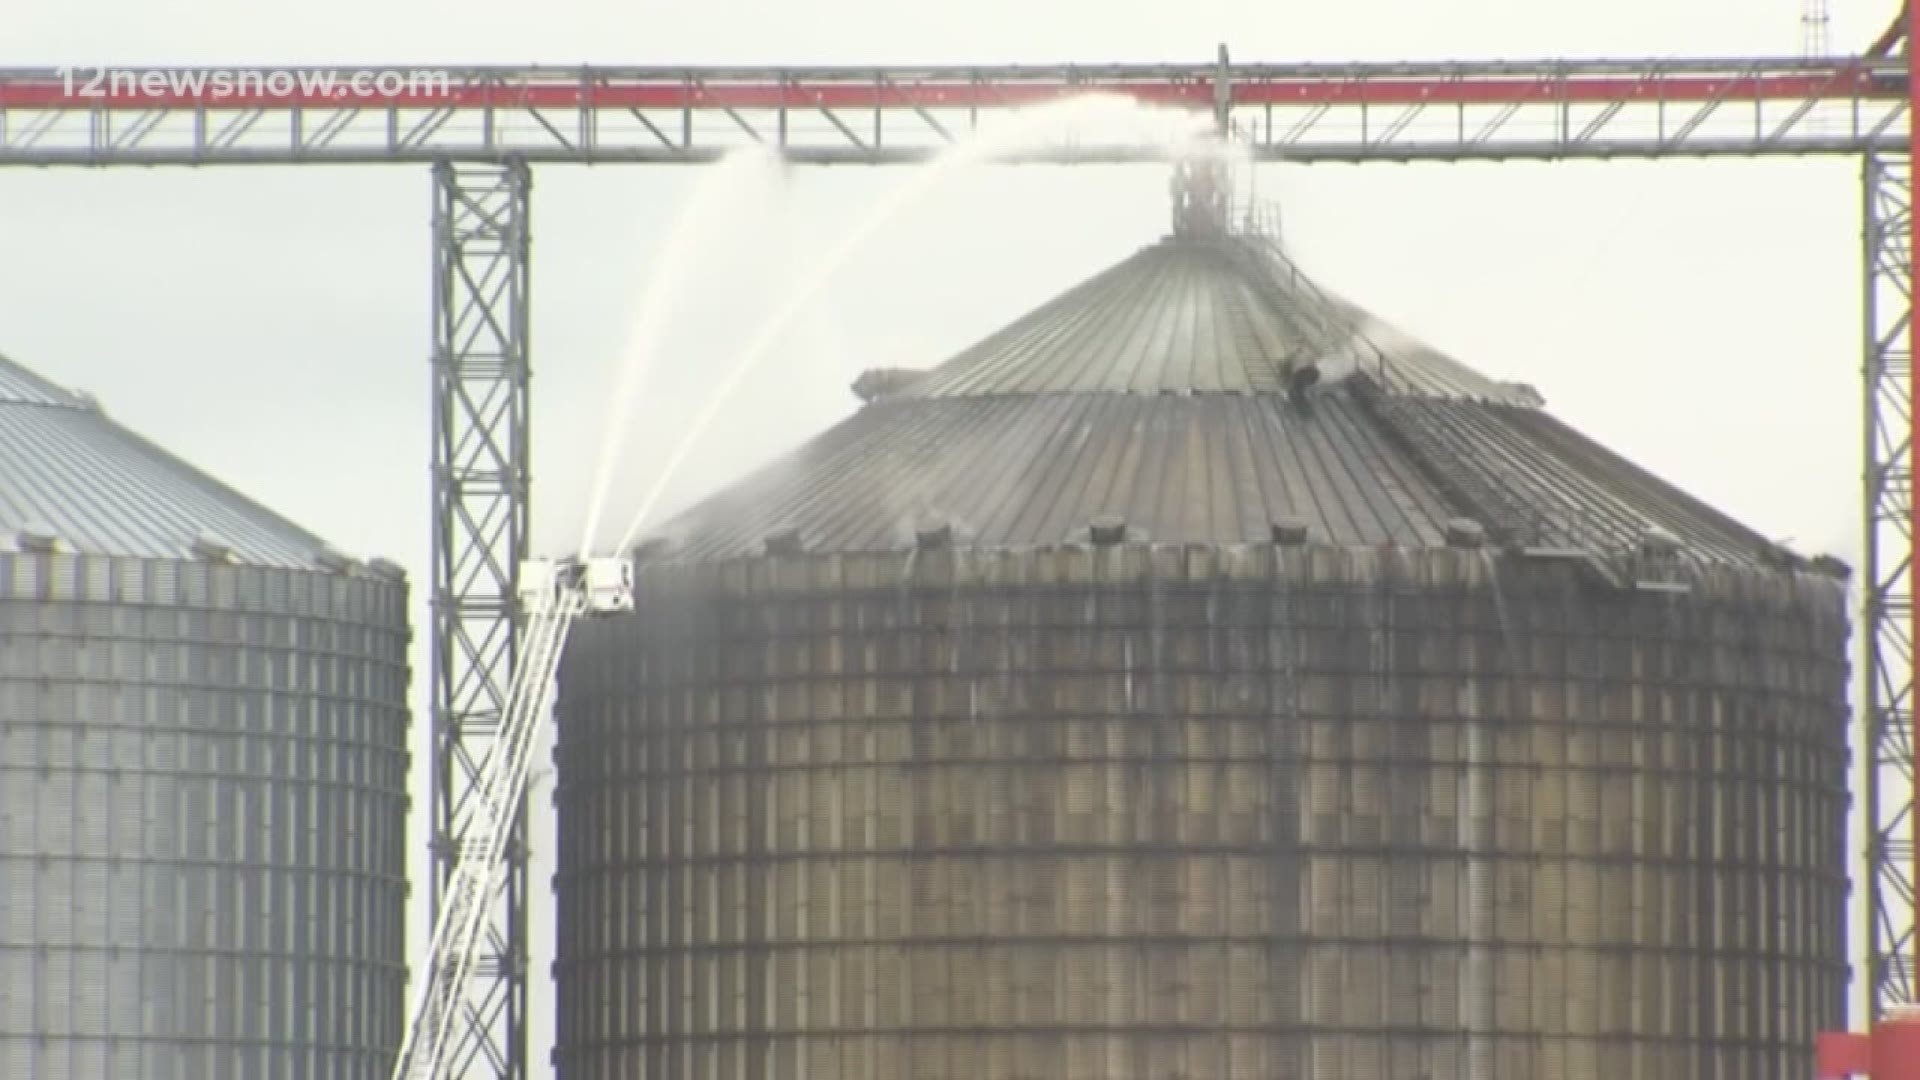 This week was the one year anniversary of when a German Pellots Texas silo caught fire in Port Arthur.